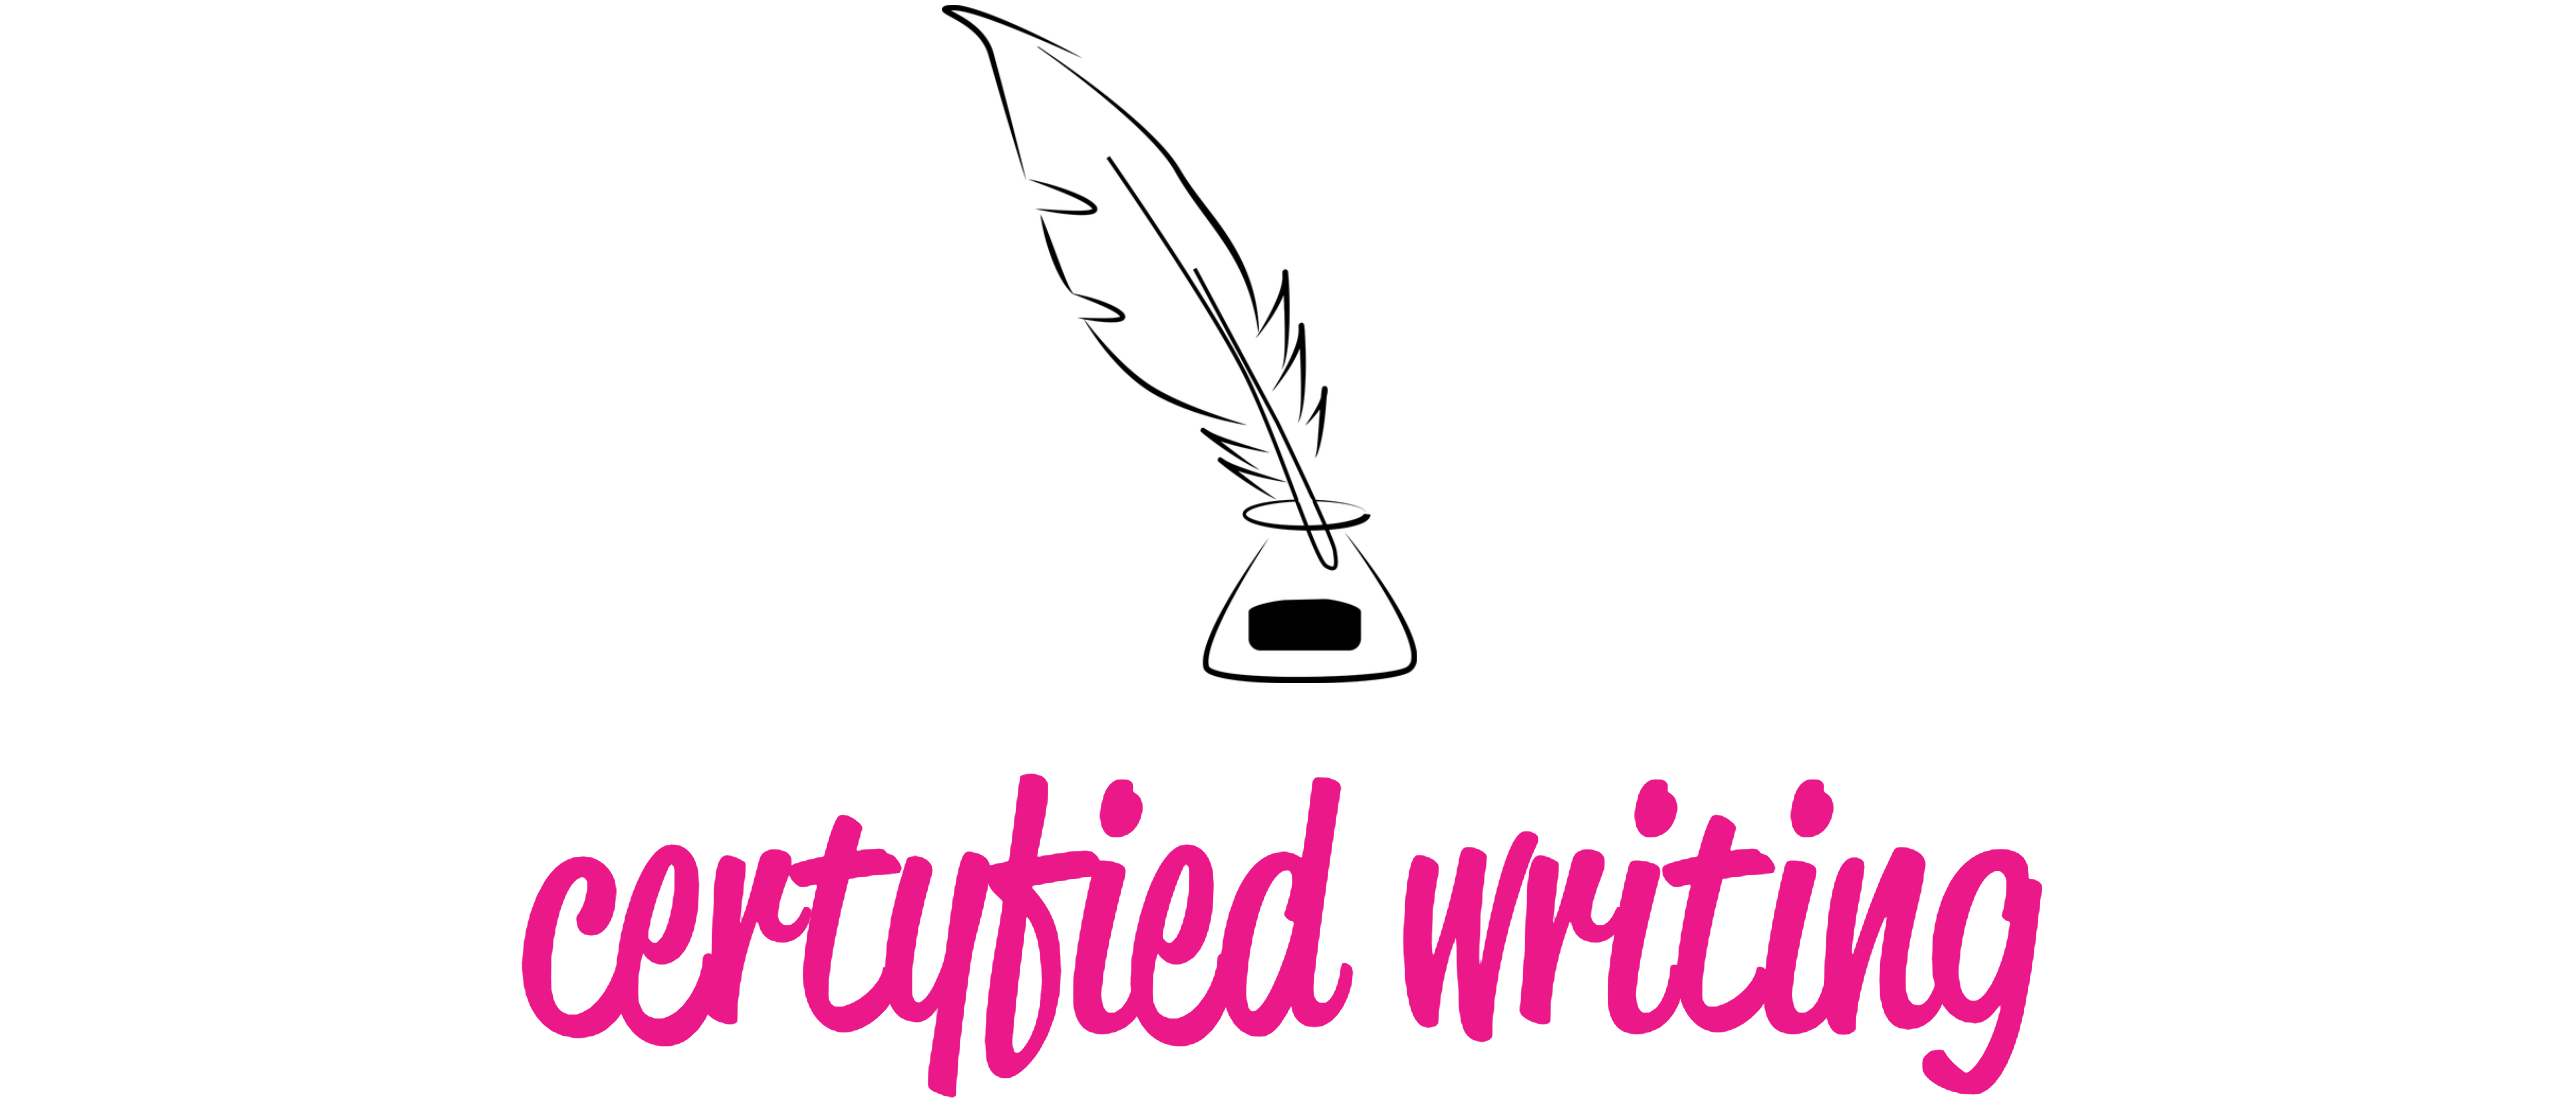 Certyfied Writing